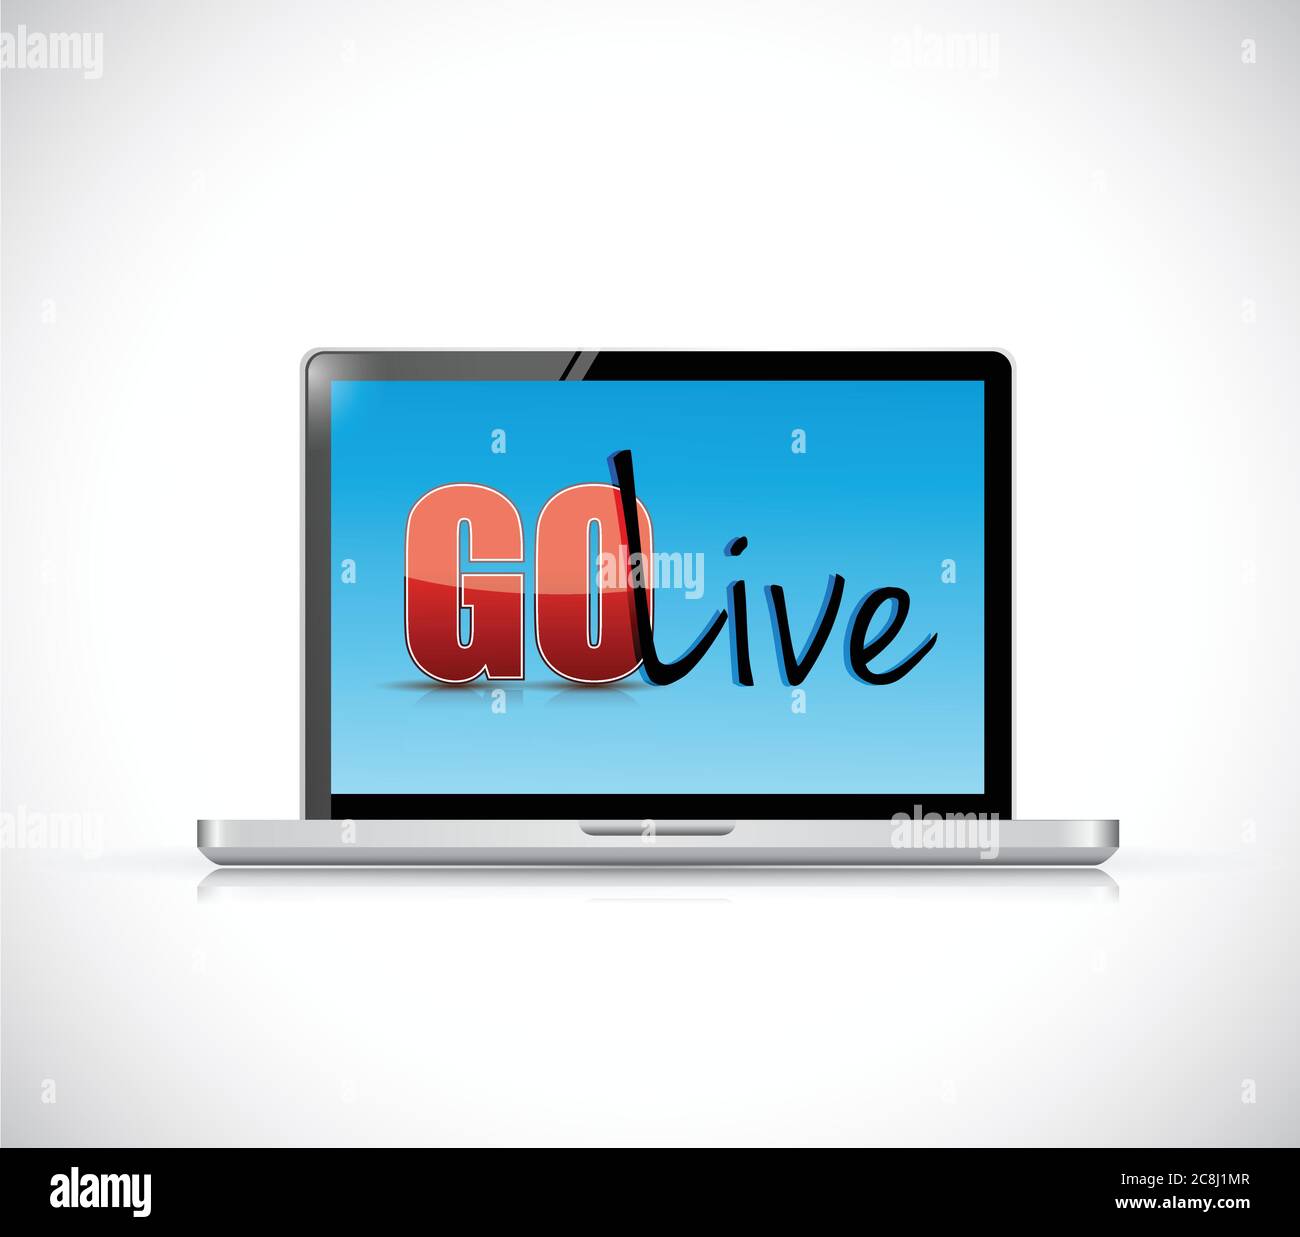 Go live sign on a laptop. illustration design over a white background Stock Vector